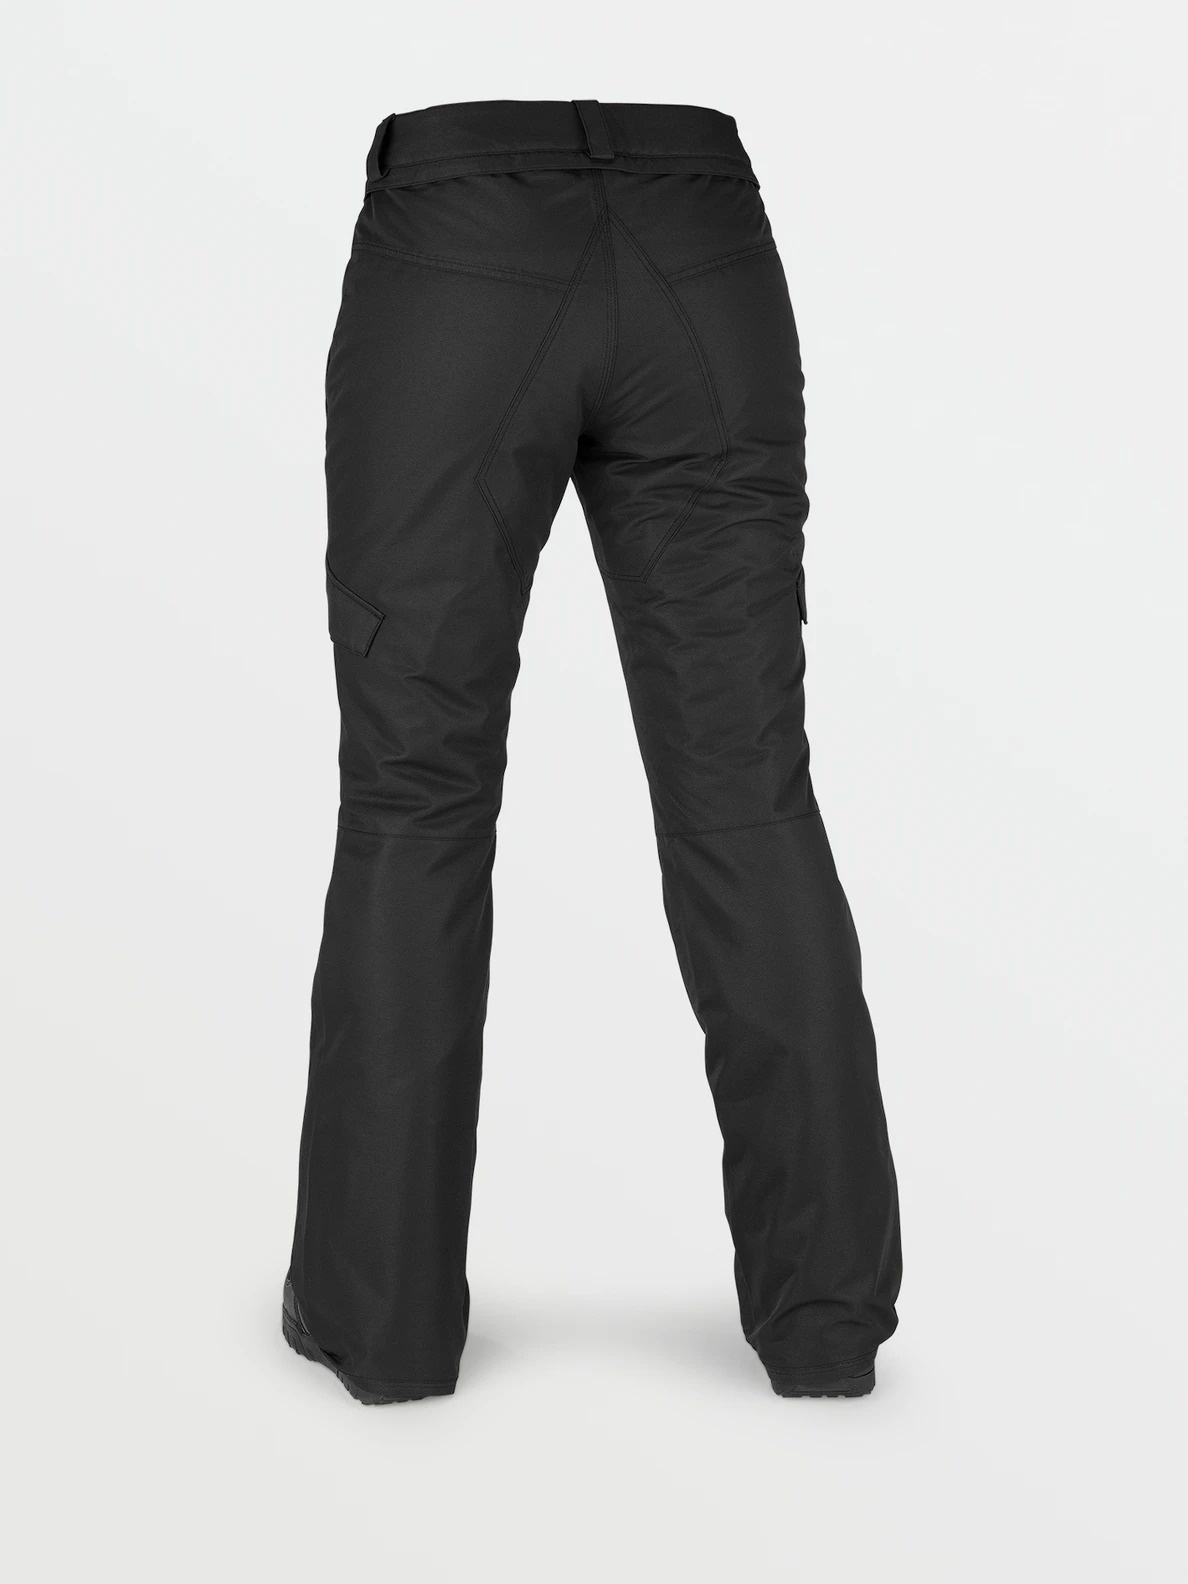 Womens Frochickie Insulated Pants - Black – Volcom US